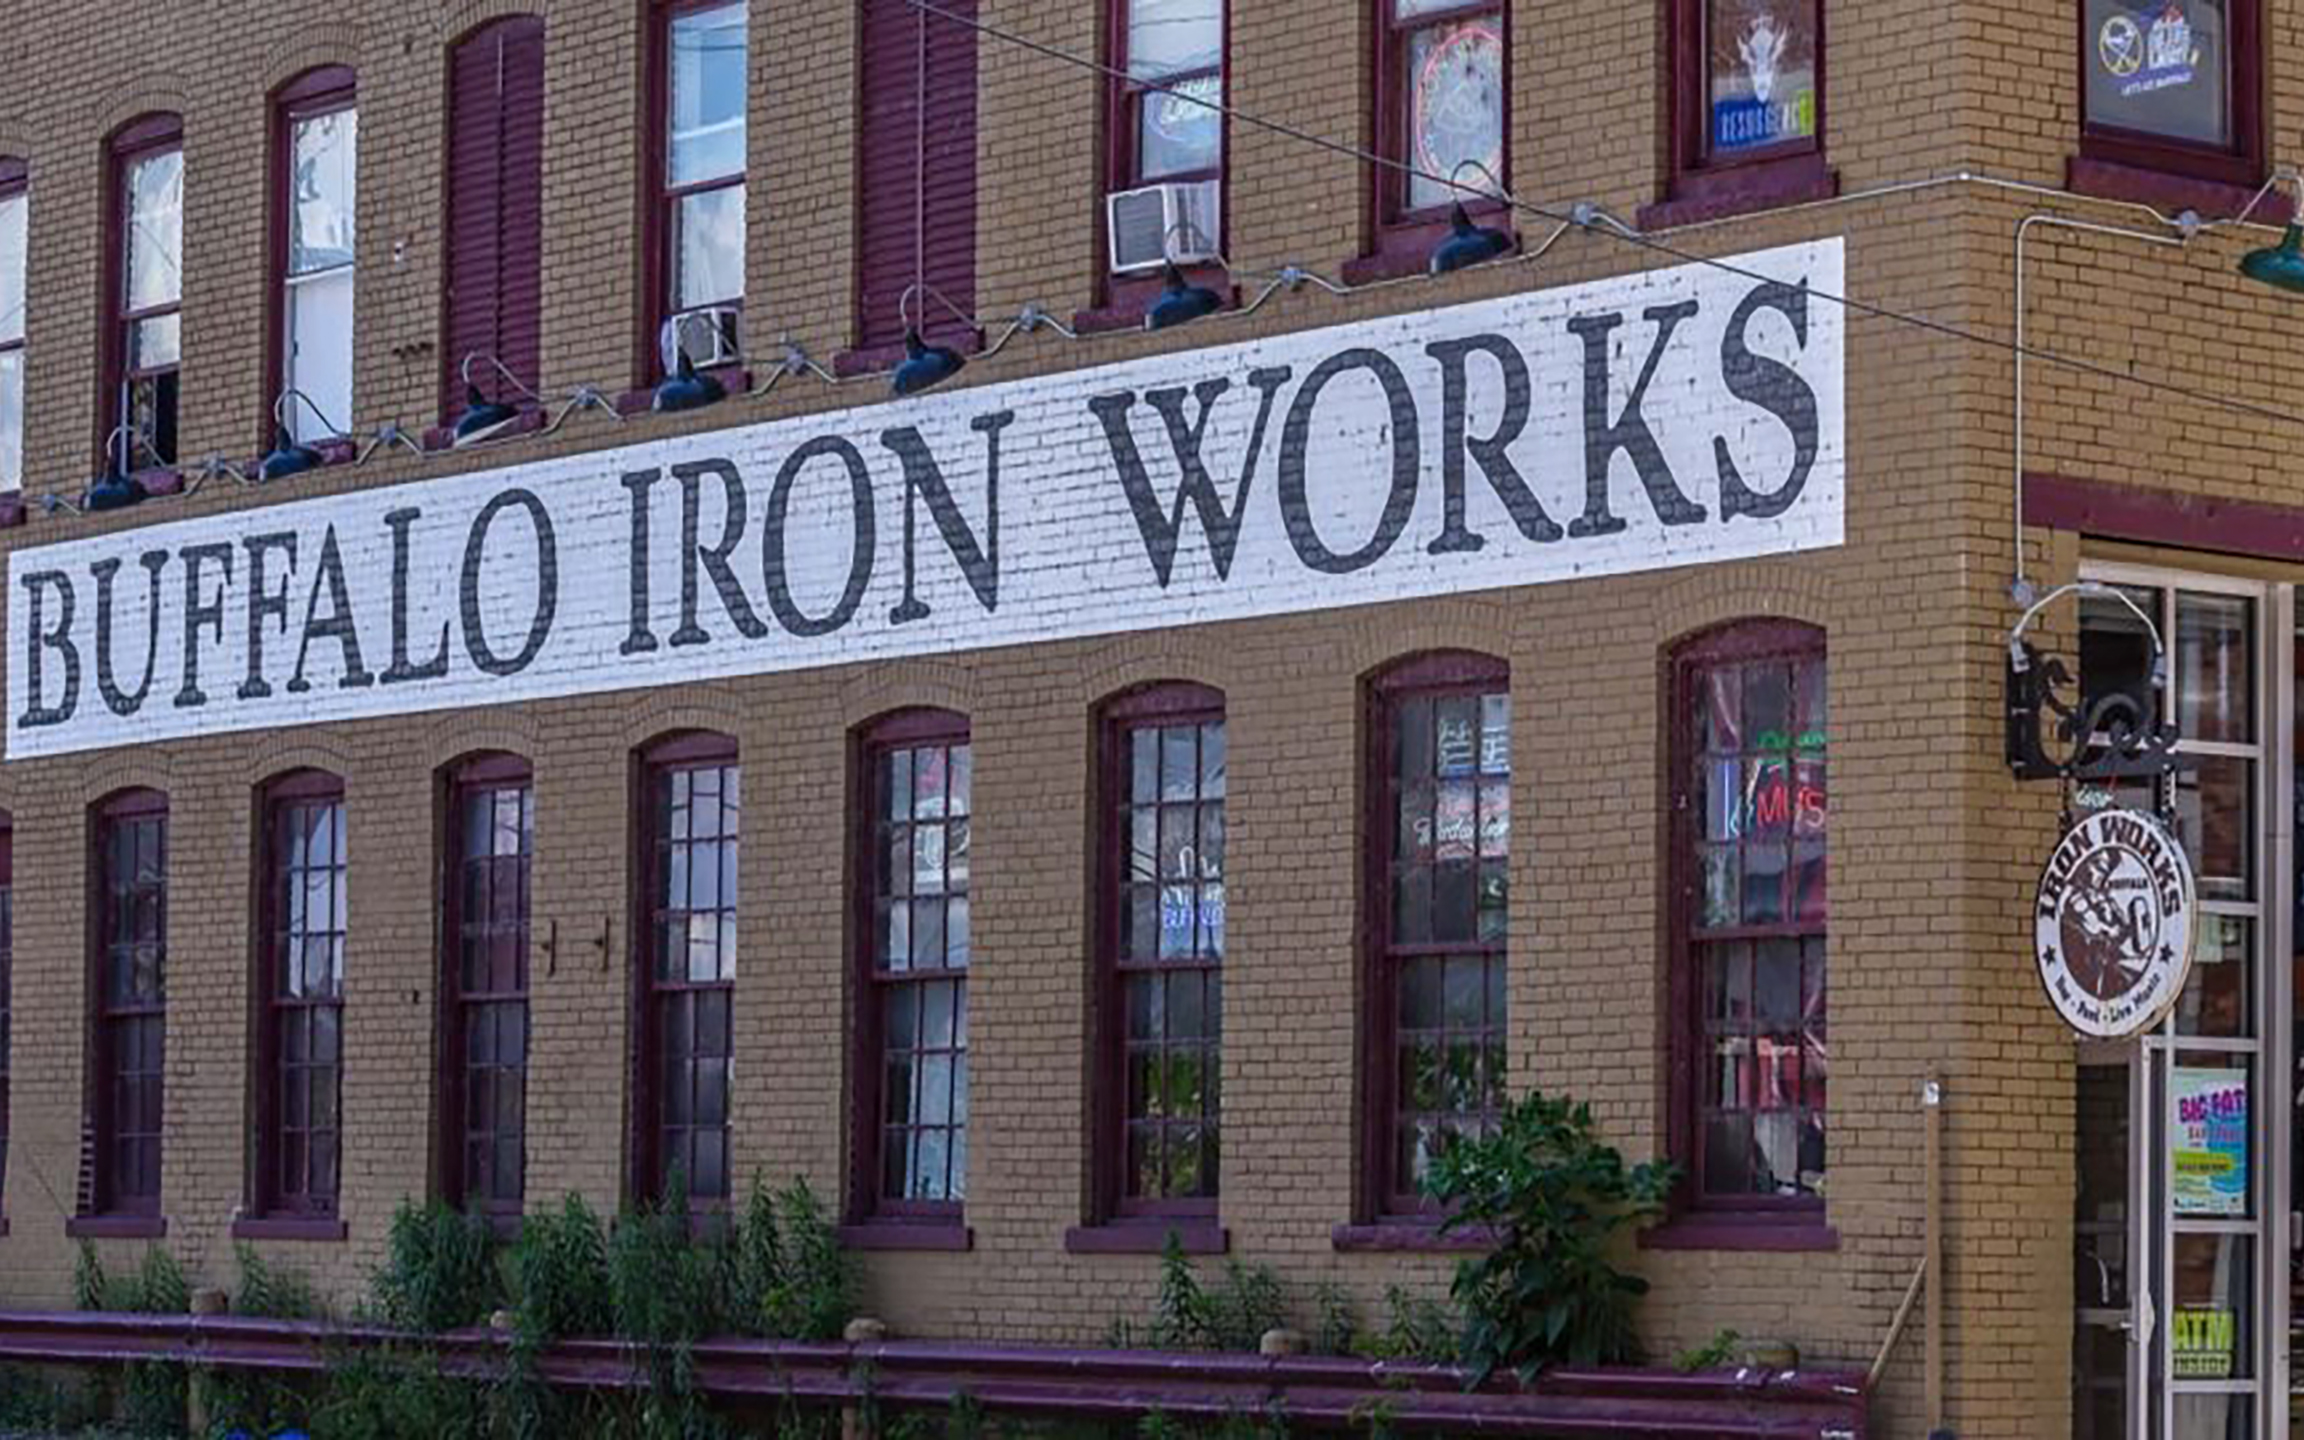 You are currently viewing Buffalo Iron Works